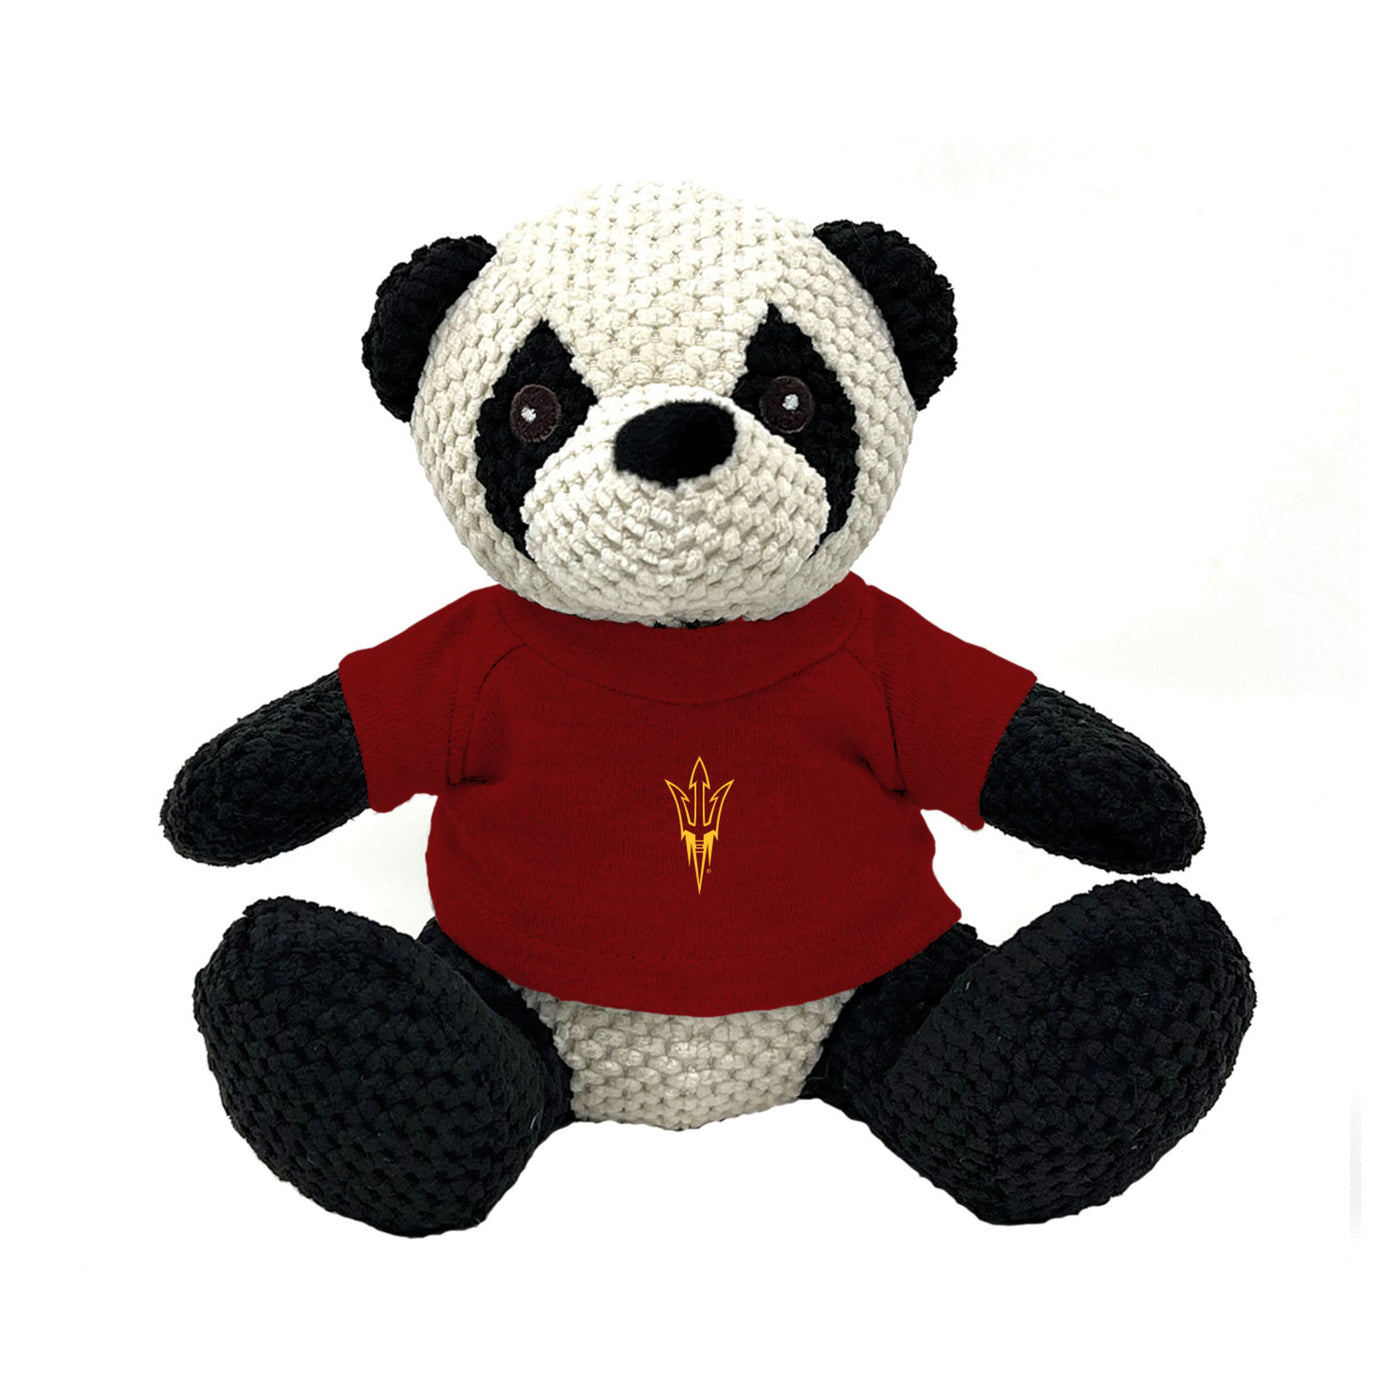 ASU black and white panda with mock crochet design wearing a maroon tee shirt with a gold outlined pitchfork  on the front